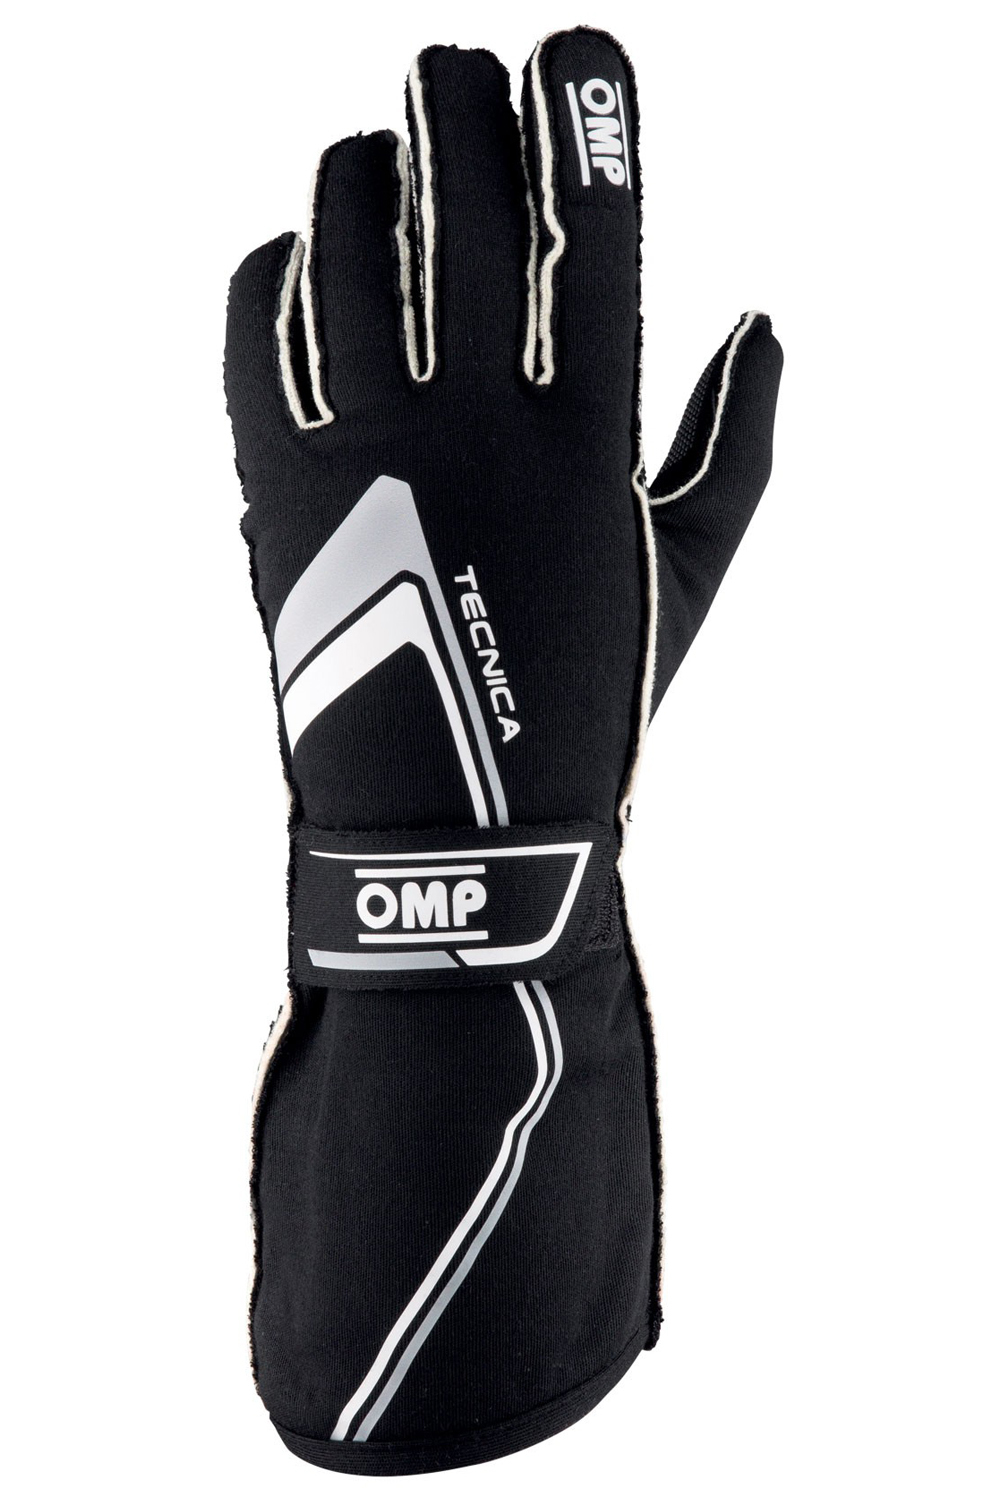 OMP Racing IB772NWS - Gloves, Tecnica, Driving, FIA Approved, Double Layer, Fire Retardant Fabric, White, Small, Pair